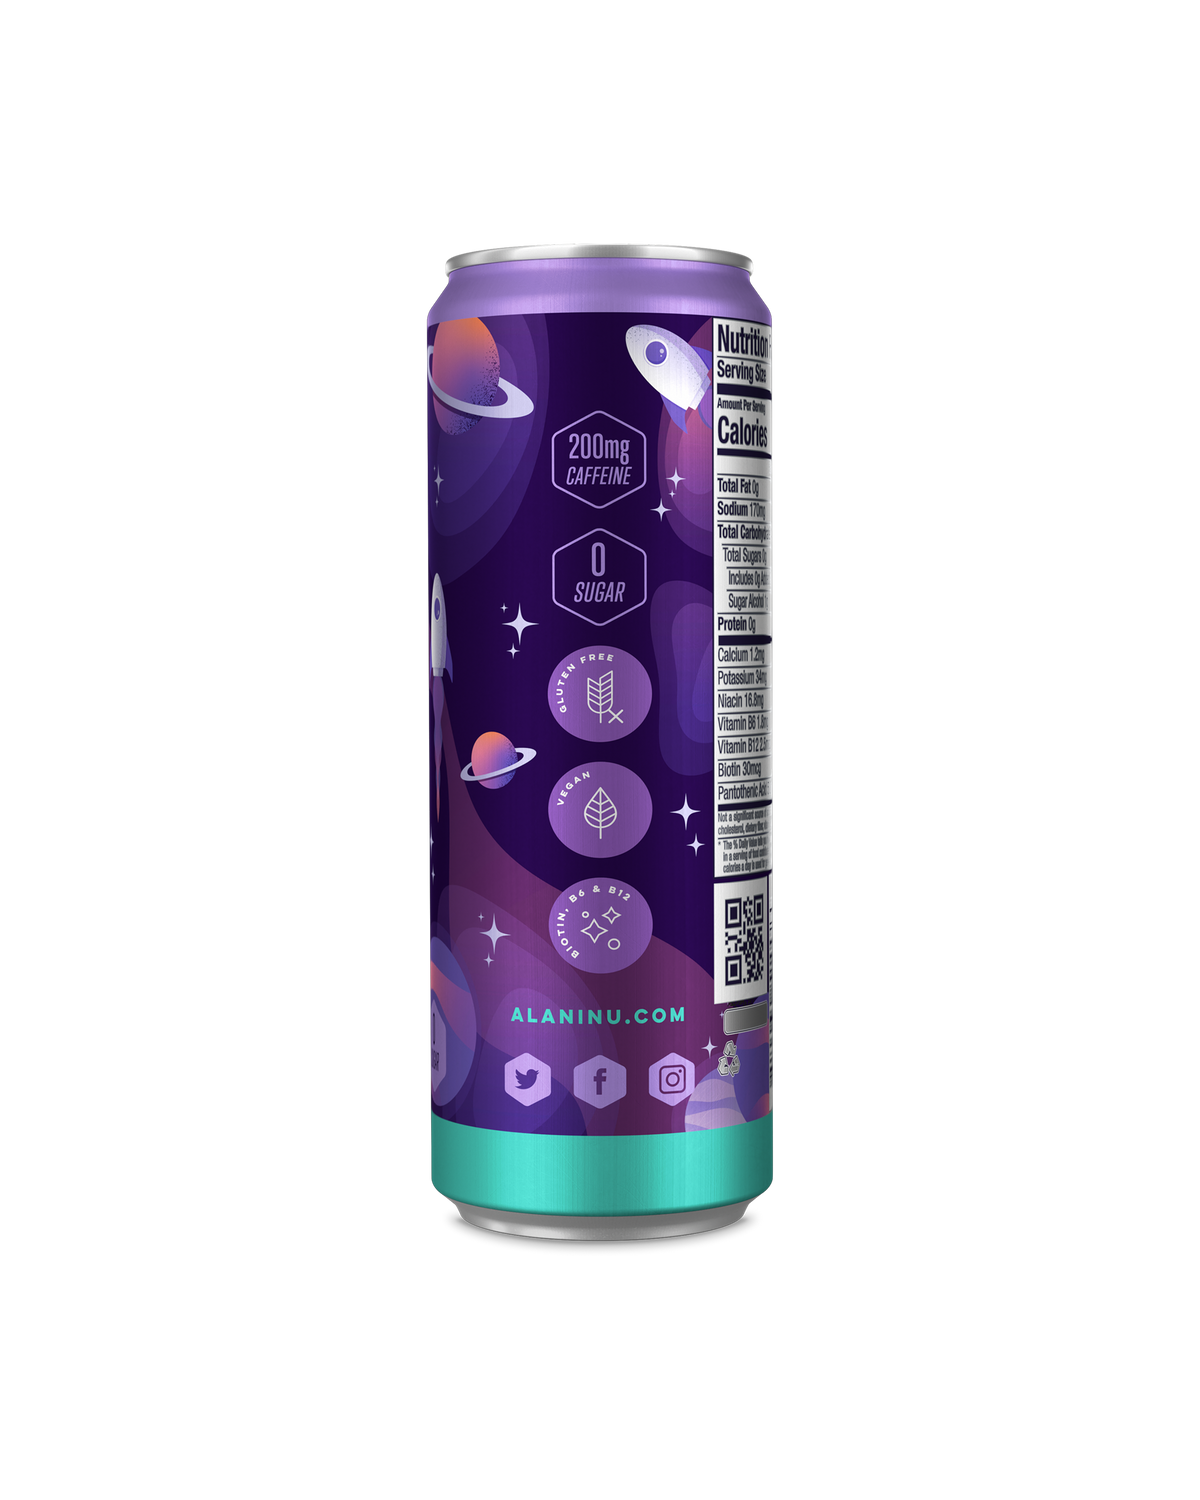 A side view of Energy drink in Cosmic Stardust flavor showcasing details of product.